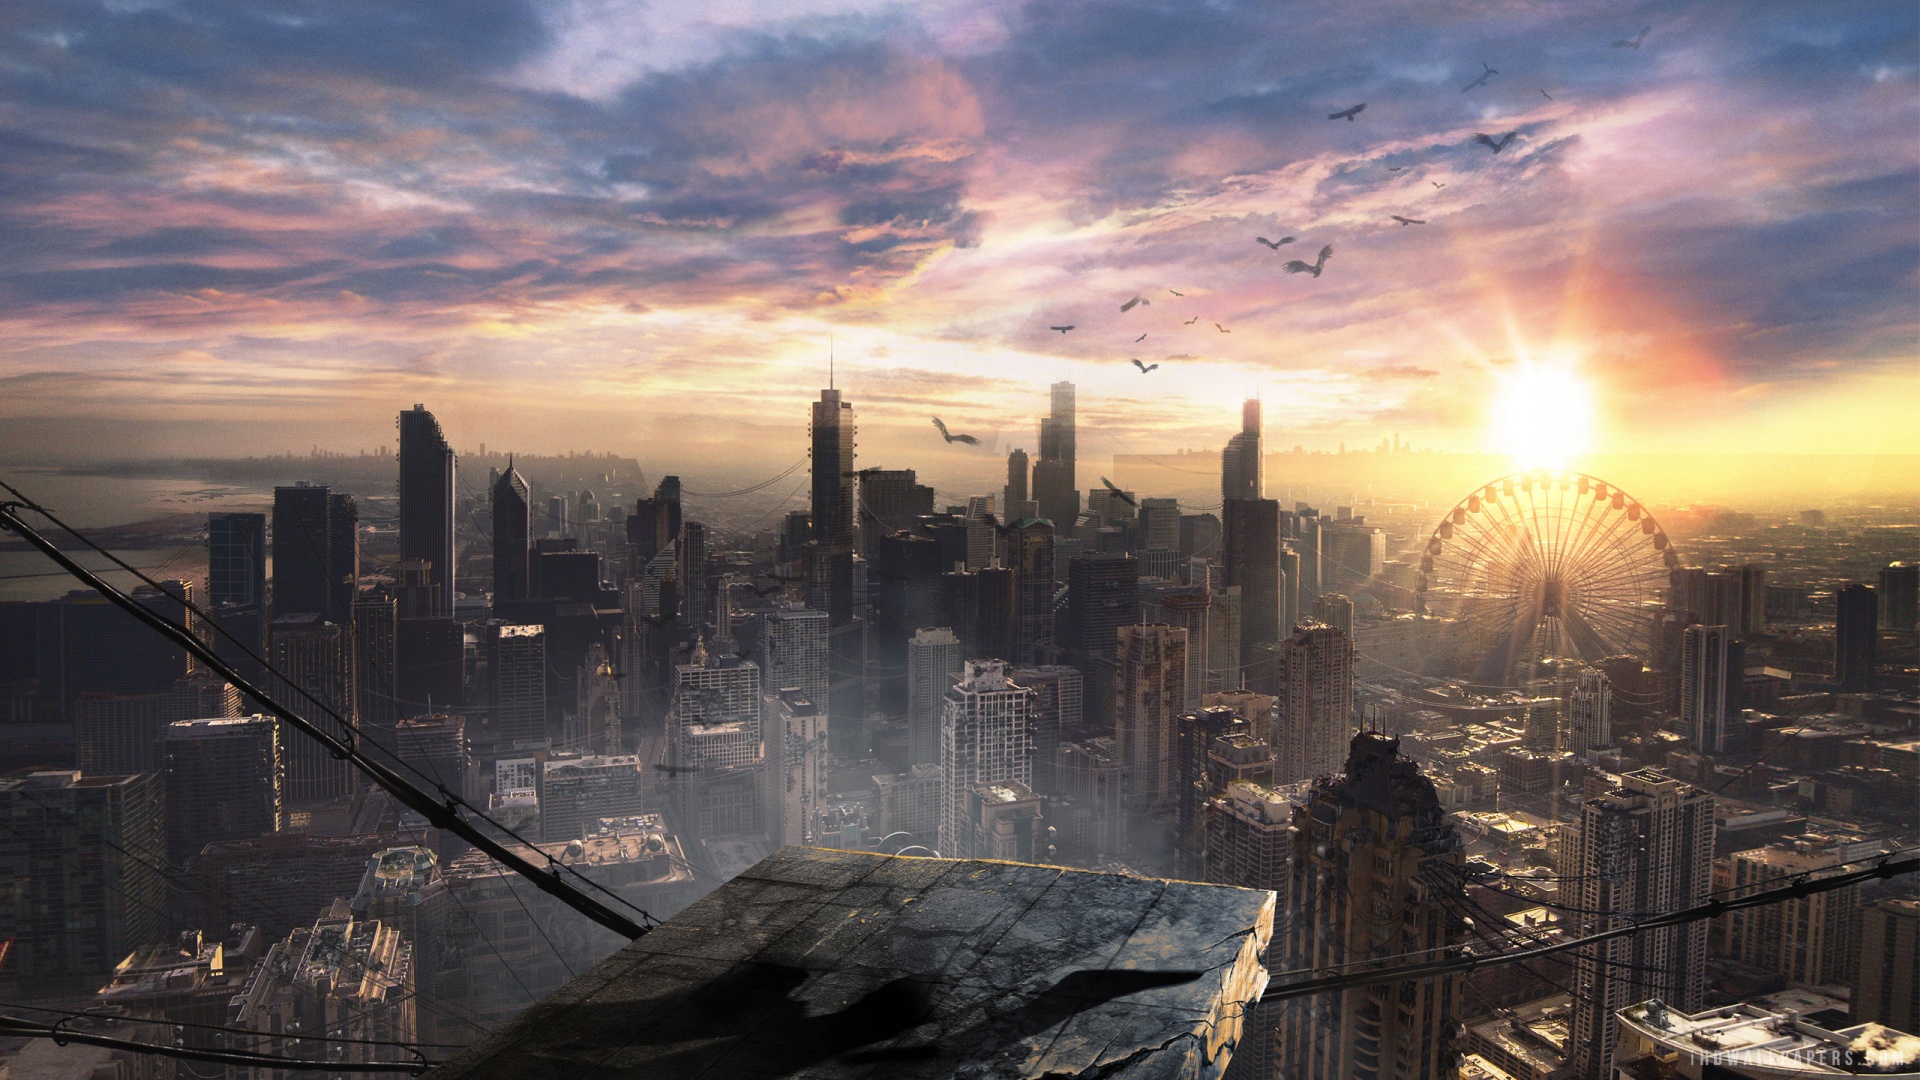 Divergent Chicago City HD Wallpaper iHD Wallpapers